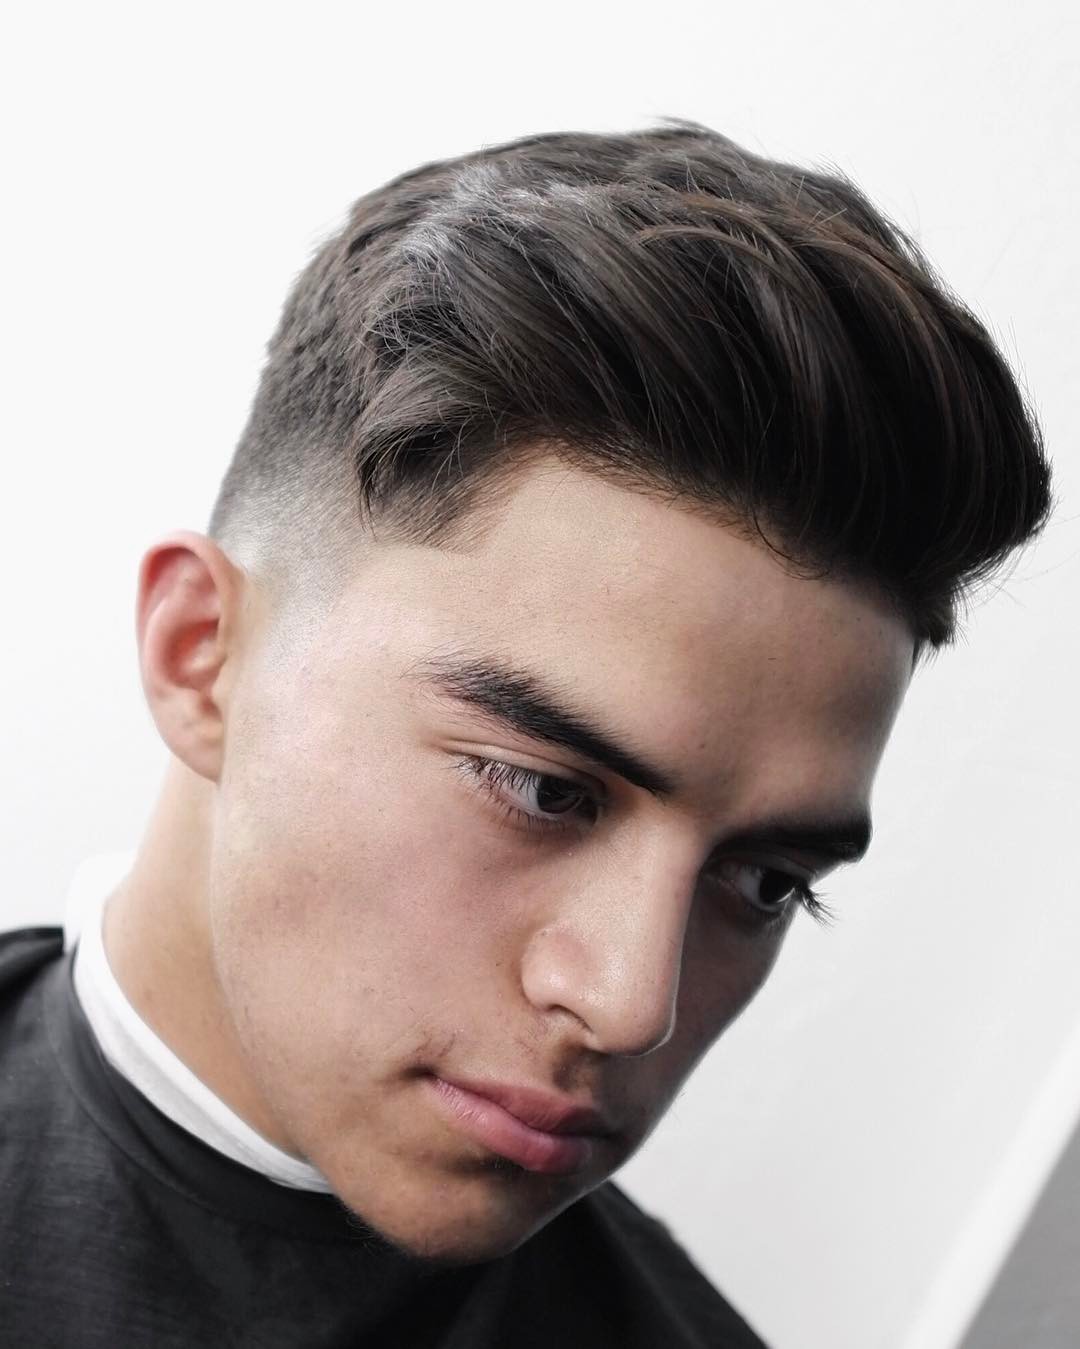 Top 100 Men S Haircuts Hairstyles For Men February 2020 Update